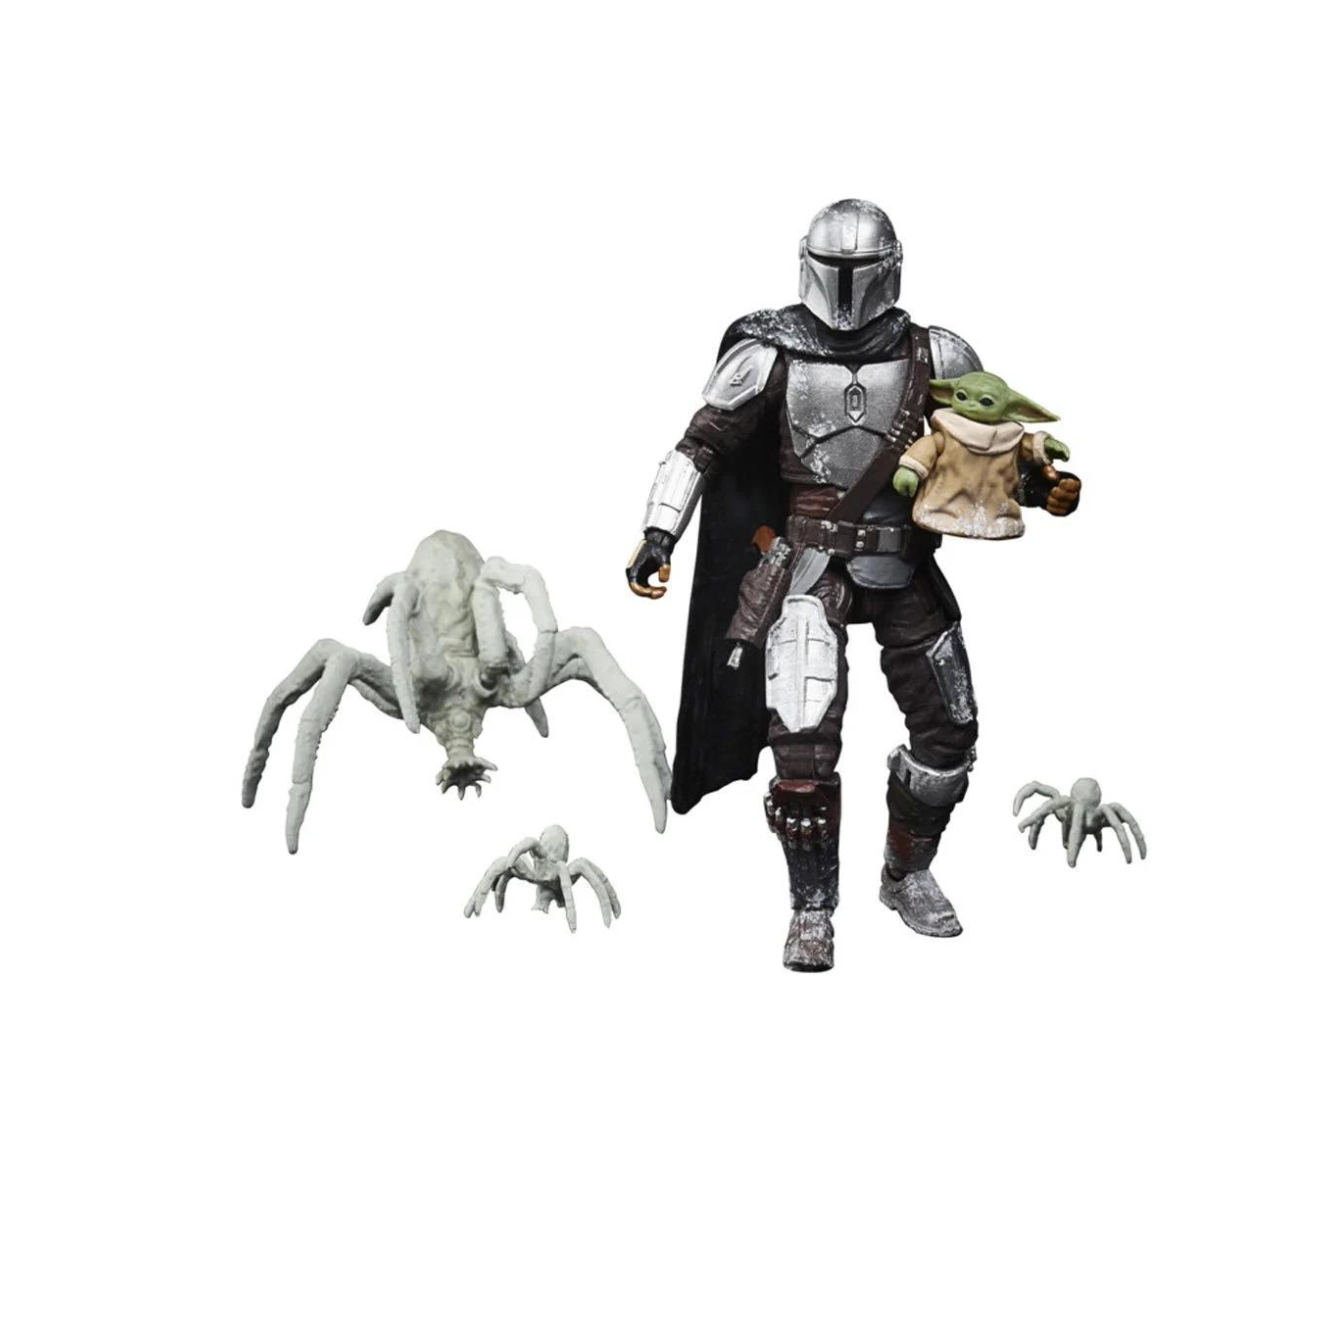 Star Wars The Vintage Collection The Mandalorian and Grogu (Maldo Kreis) 3 3/4-inch Action Figures